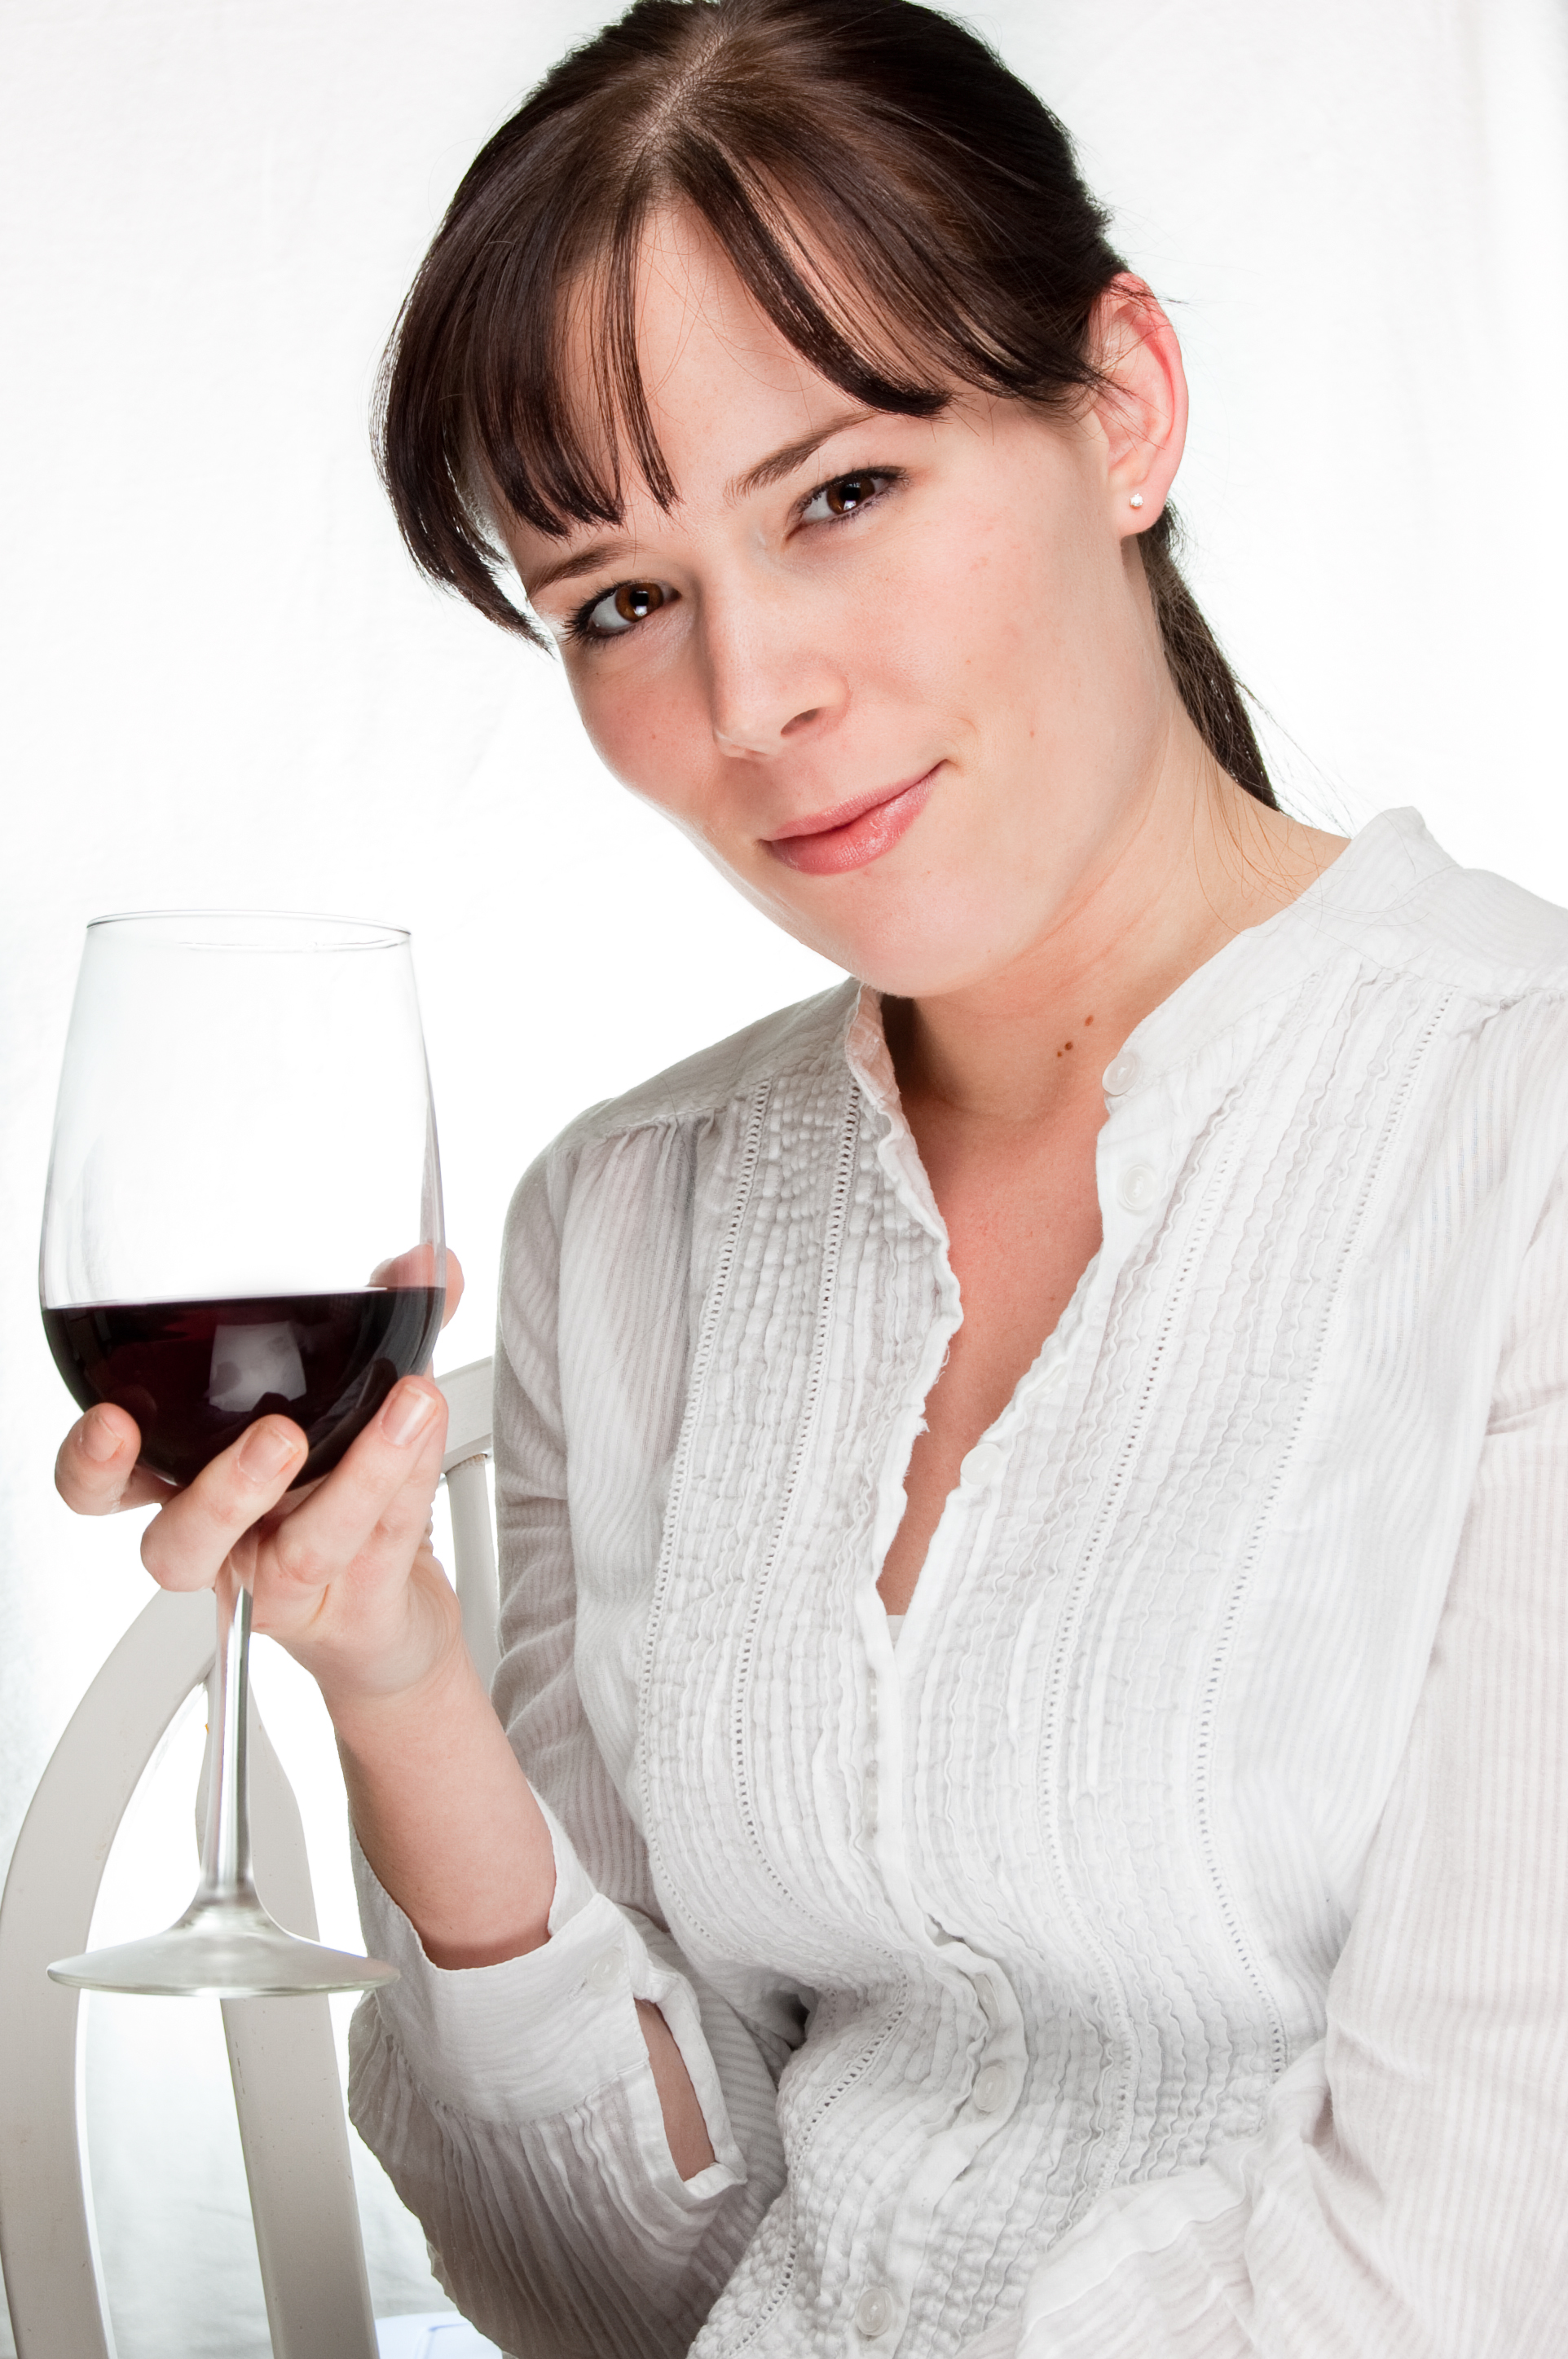 What Do Wine Reviewers Look For?